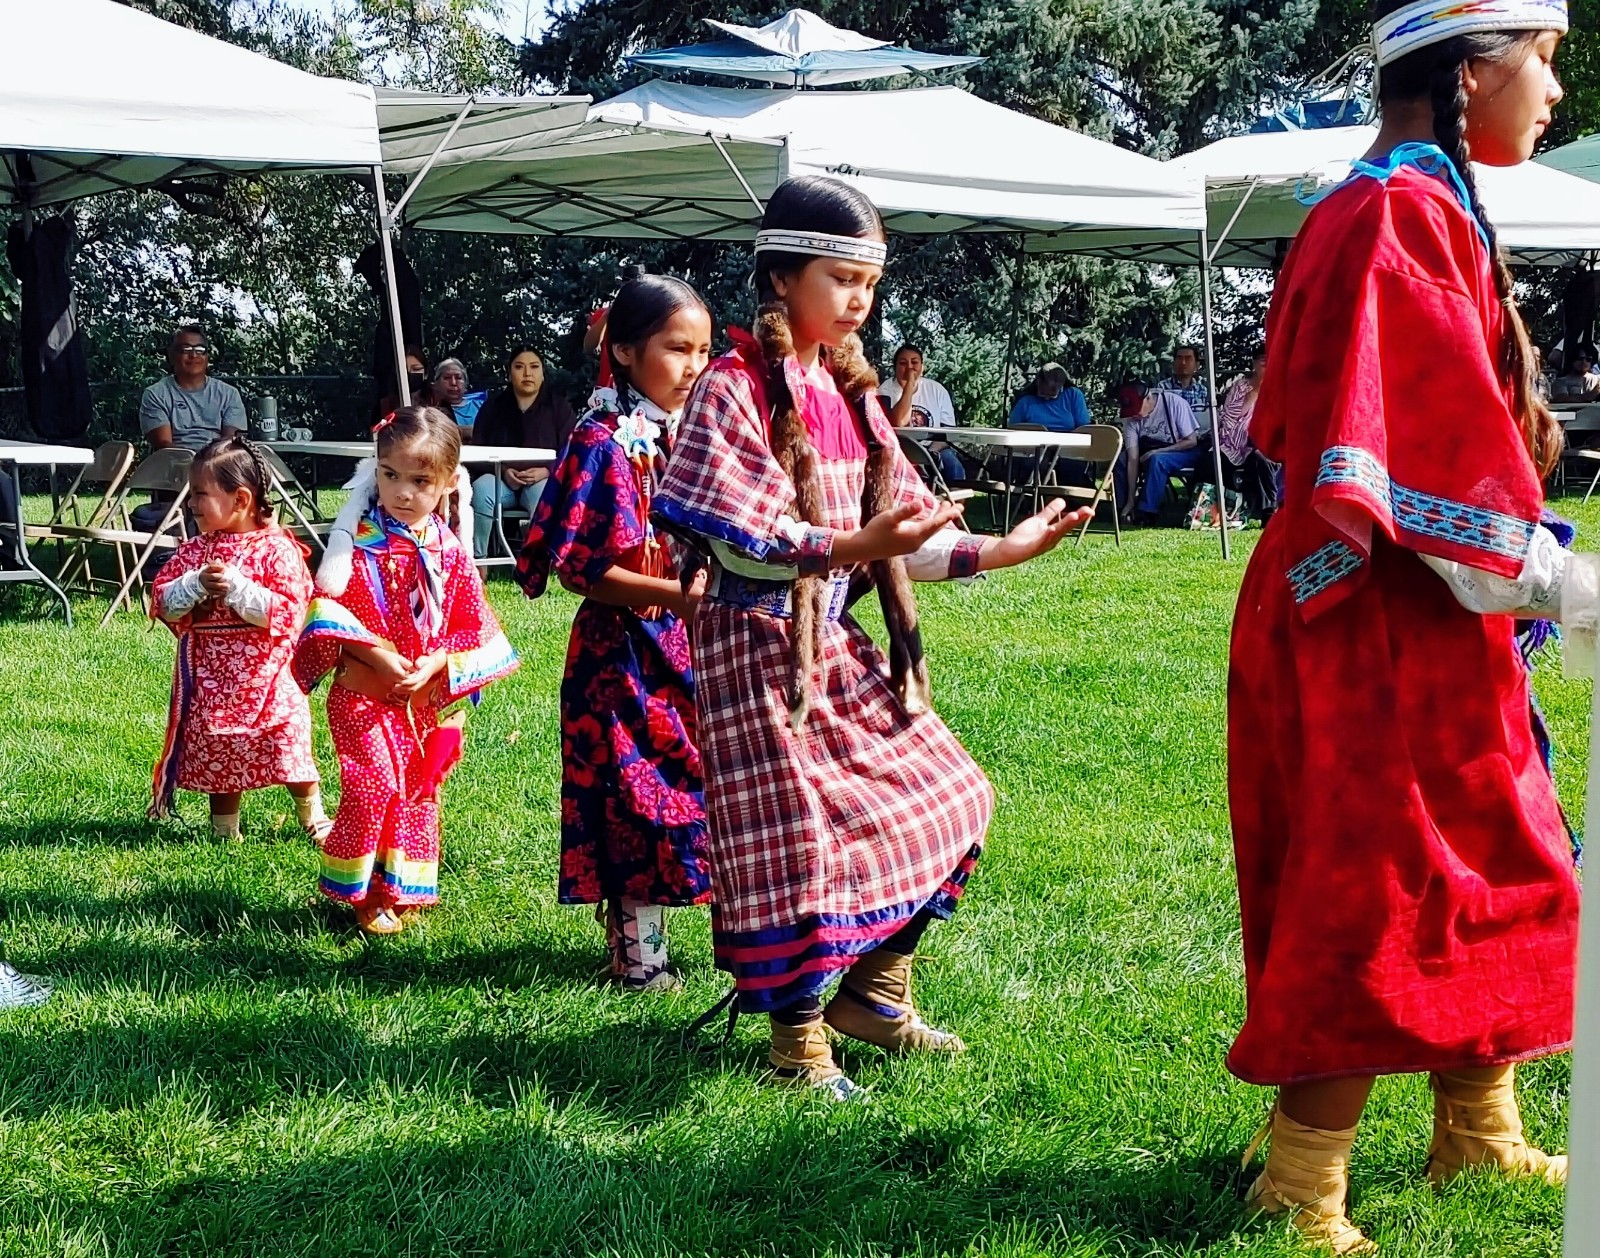 Members of the Yakama Nation gathered Friday at the Wye Park in Richland near Bateman Island to advocate for salmon. They are calling for immediate removal of the earthen causeway to the island, which reduces water flow and increases water temperatures and sediment, fostering invasive plants and predatory fish. (photo/Yakama Nation)